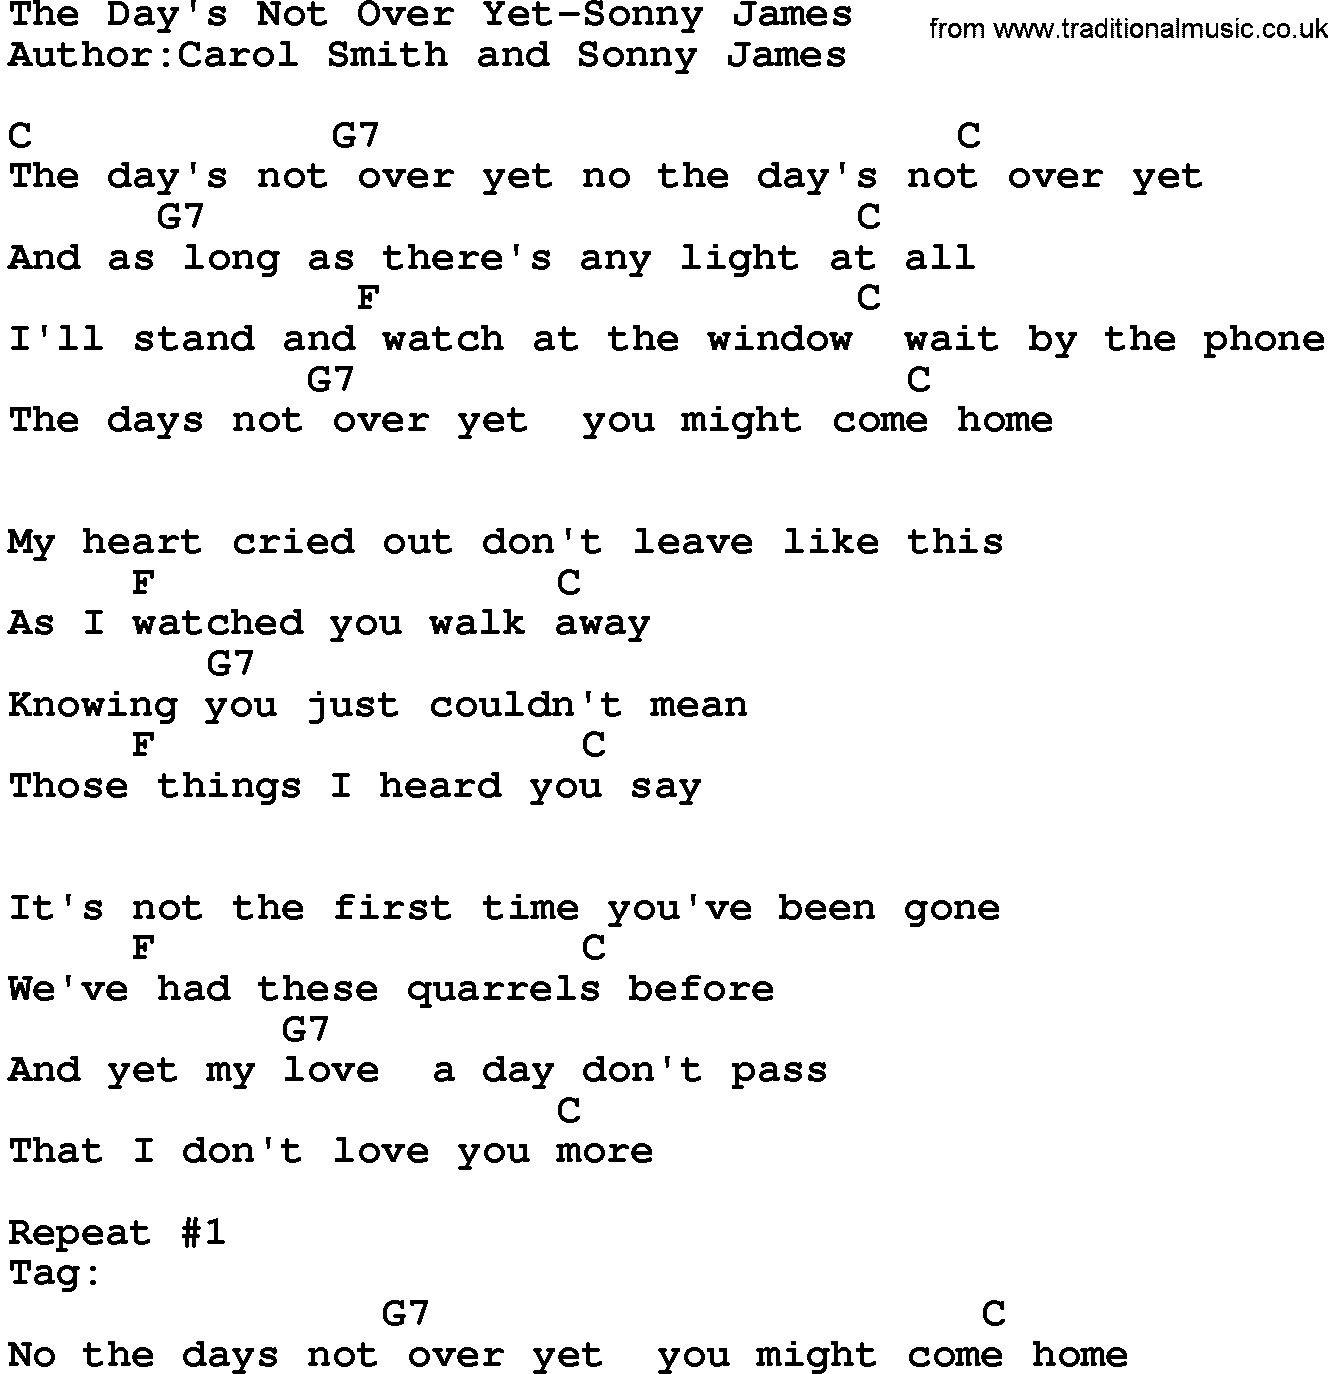 Country music song: The Day's Not Over Yet-Sonny James lyrics and chords